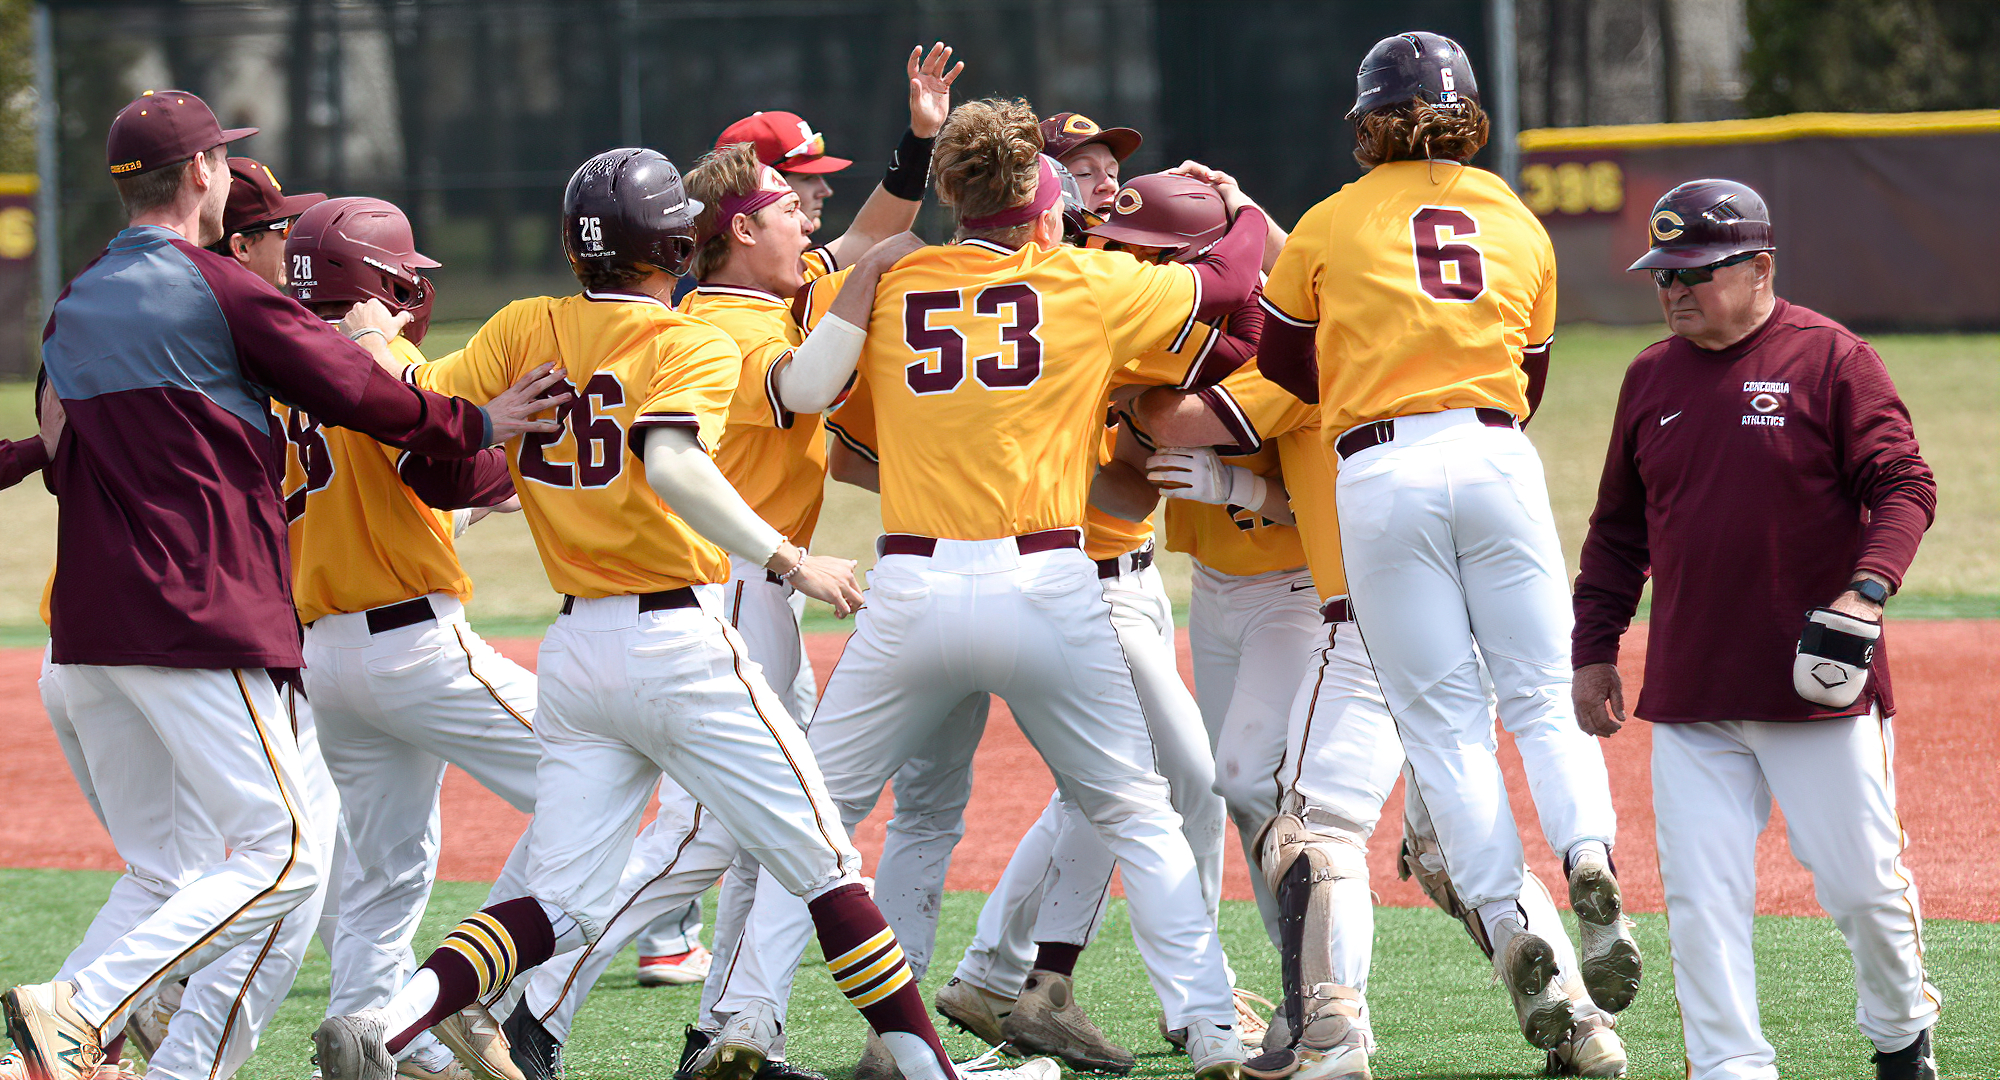 Cobber players celebrate the come-from-behind, extra-inning win in their Game 1 win over St. Mary's.